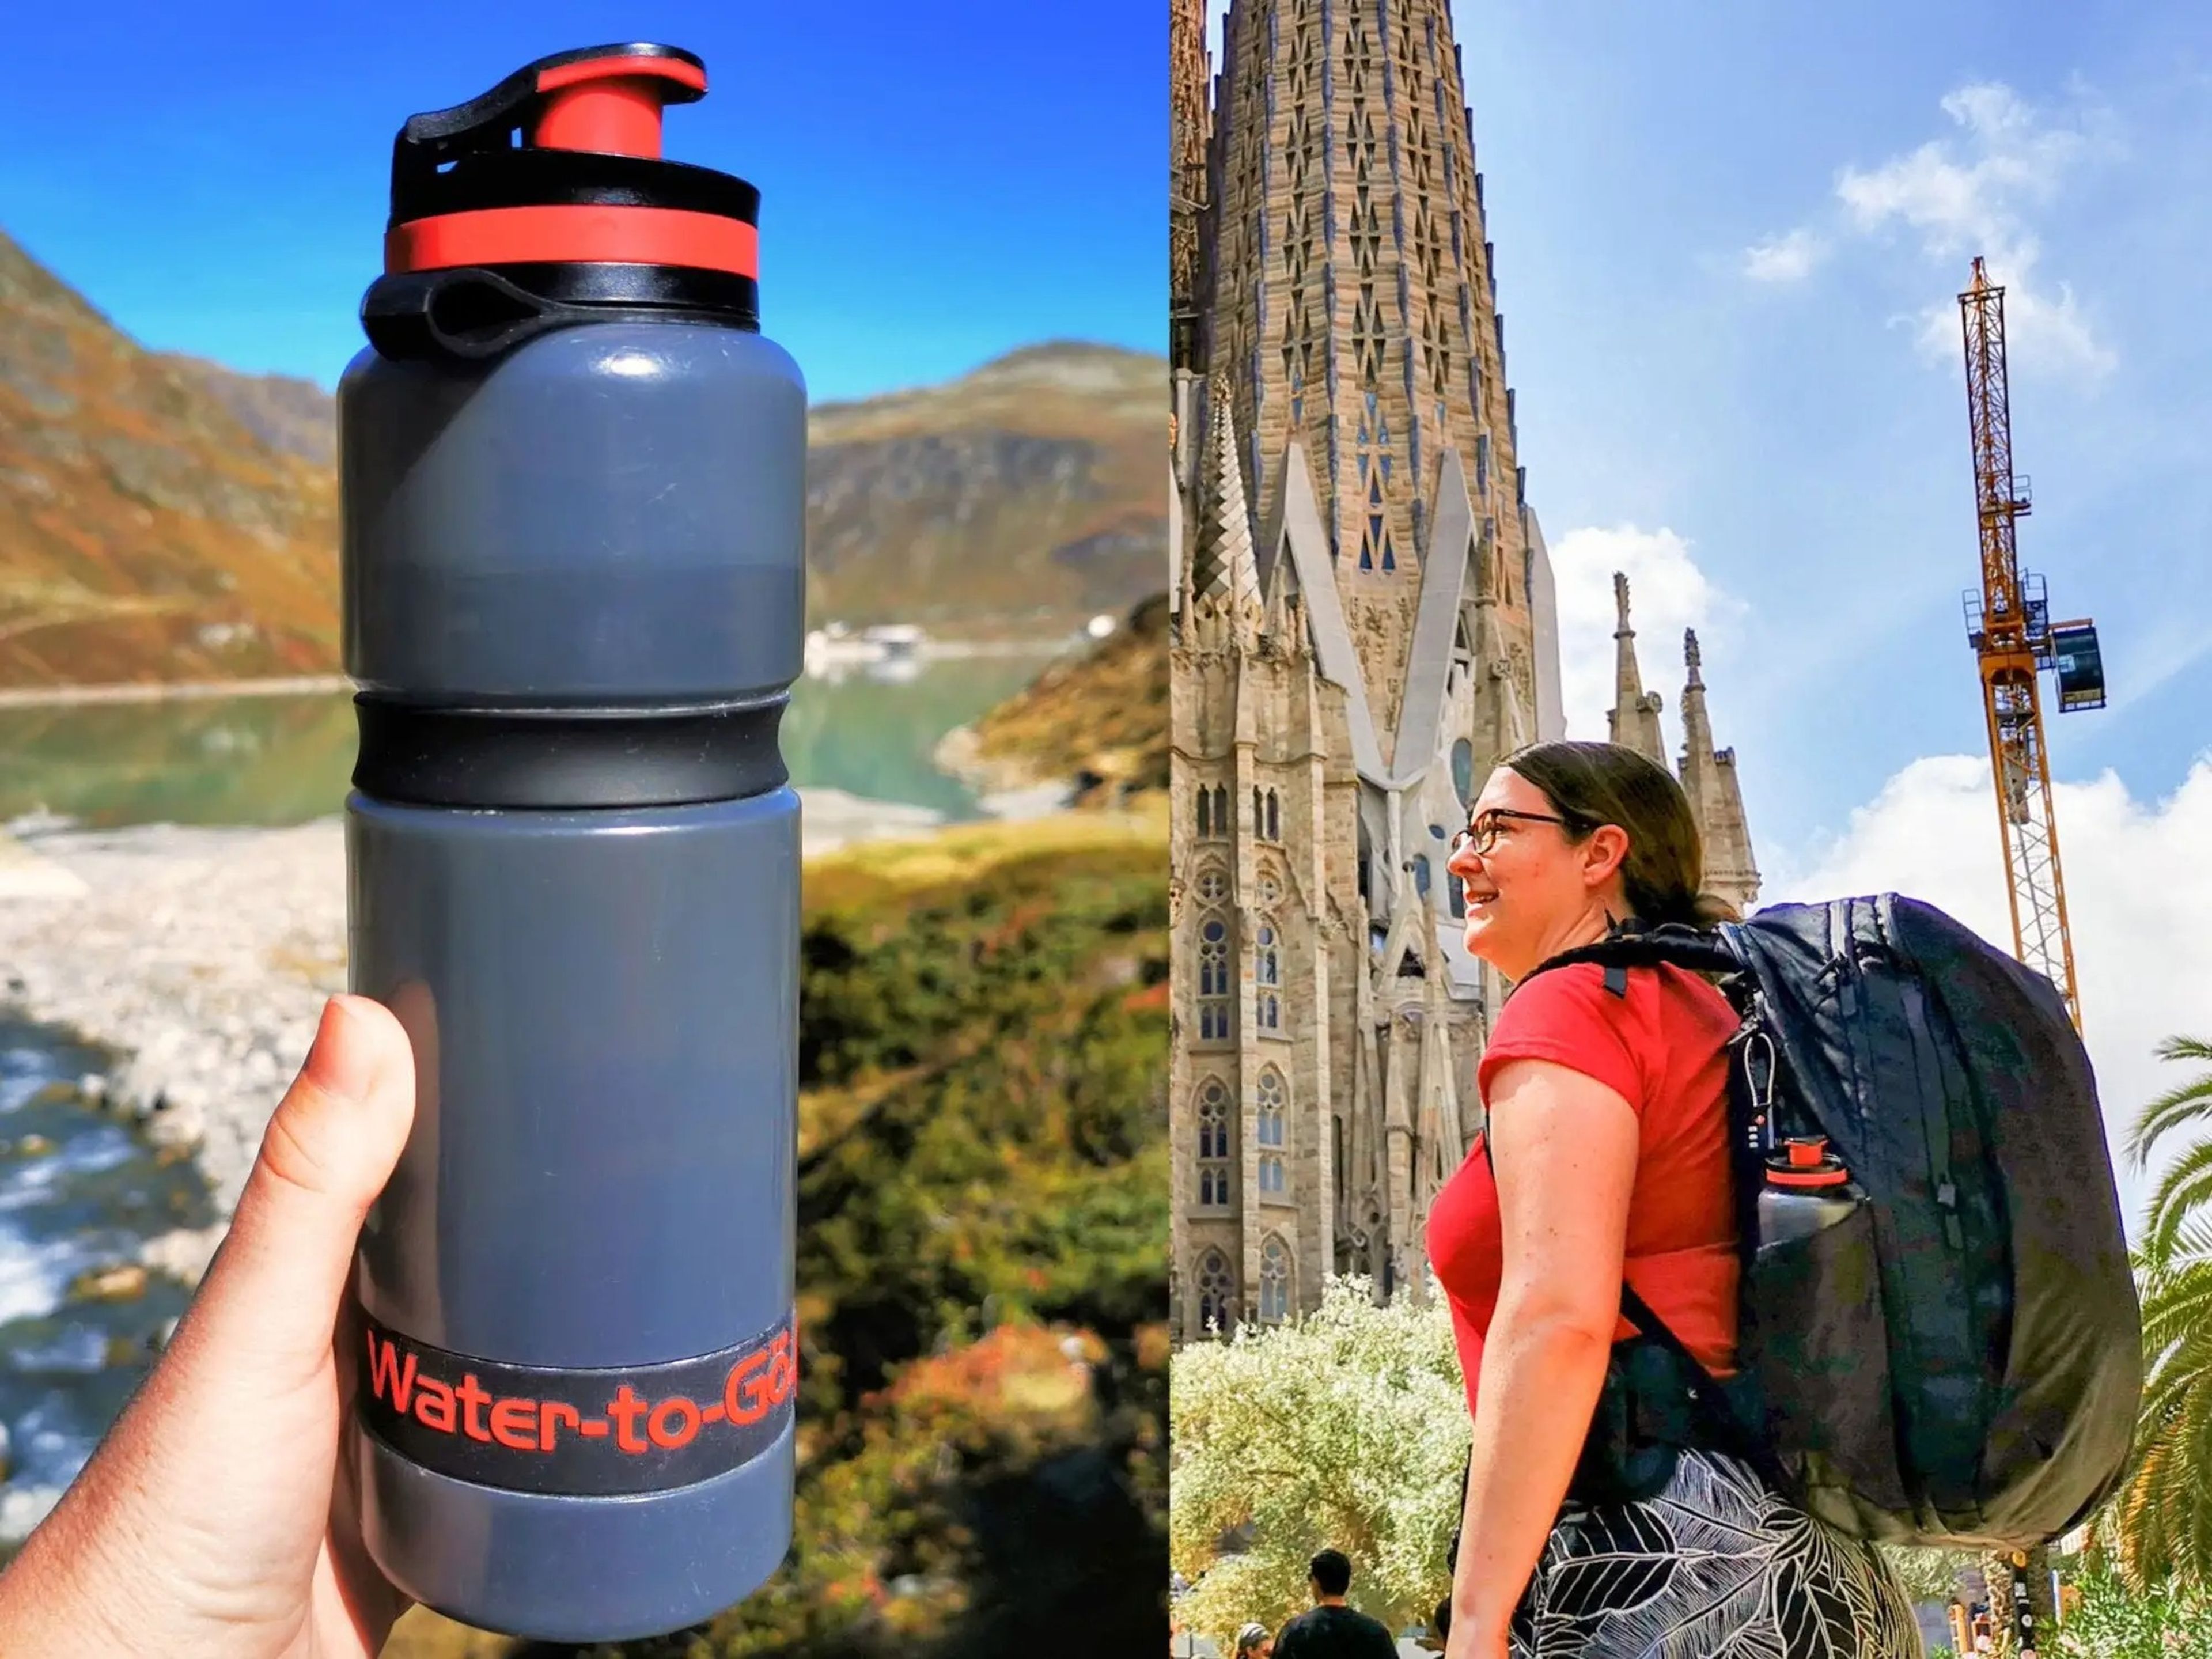 Left: A hand holds a gray and red water bottle in front of a mountain basin with blue skies in the background. Right: A woman carries a backpack with trees on either side of her and a renaissance building behind her.